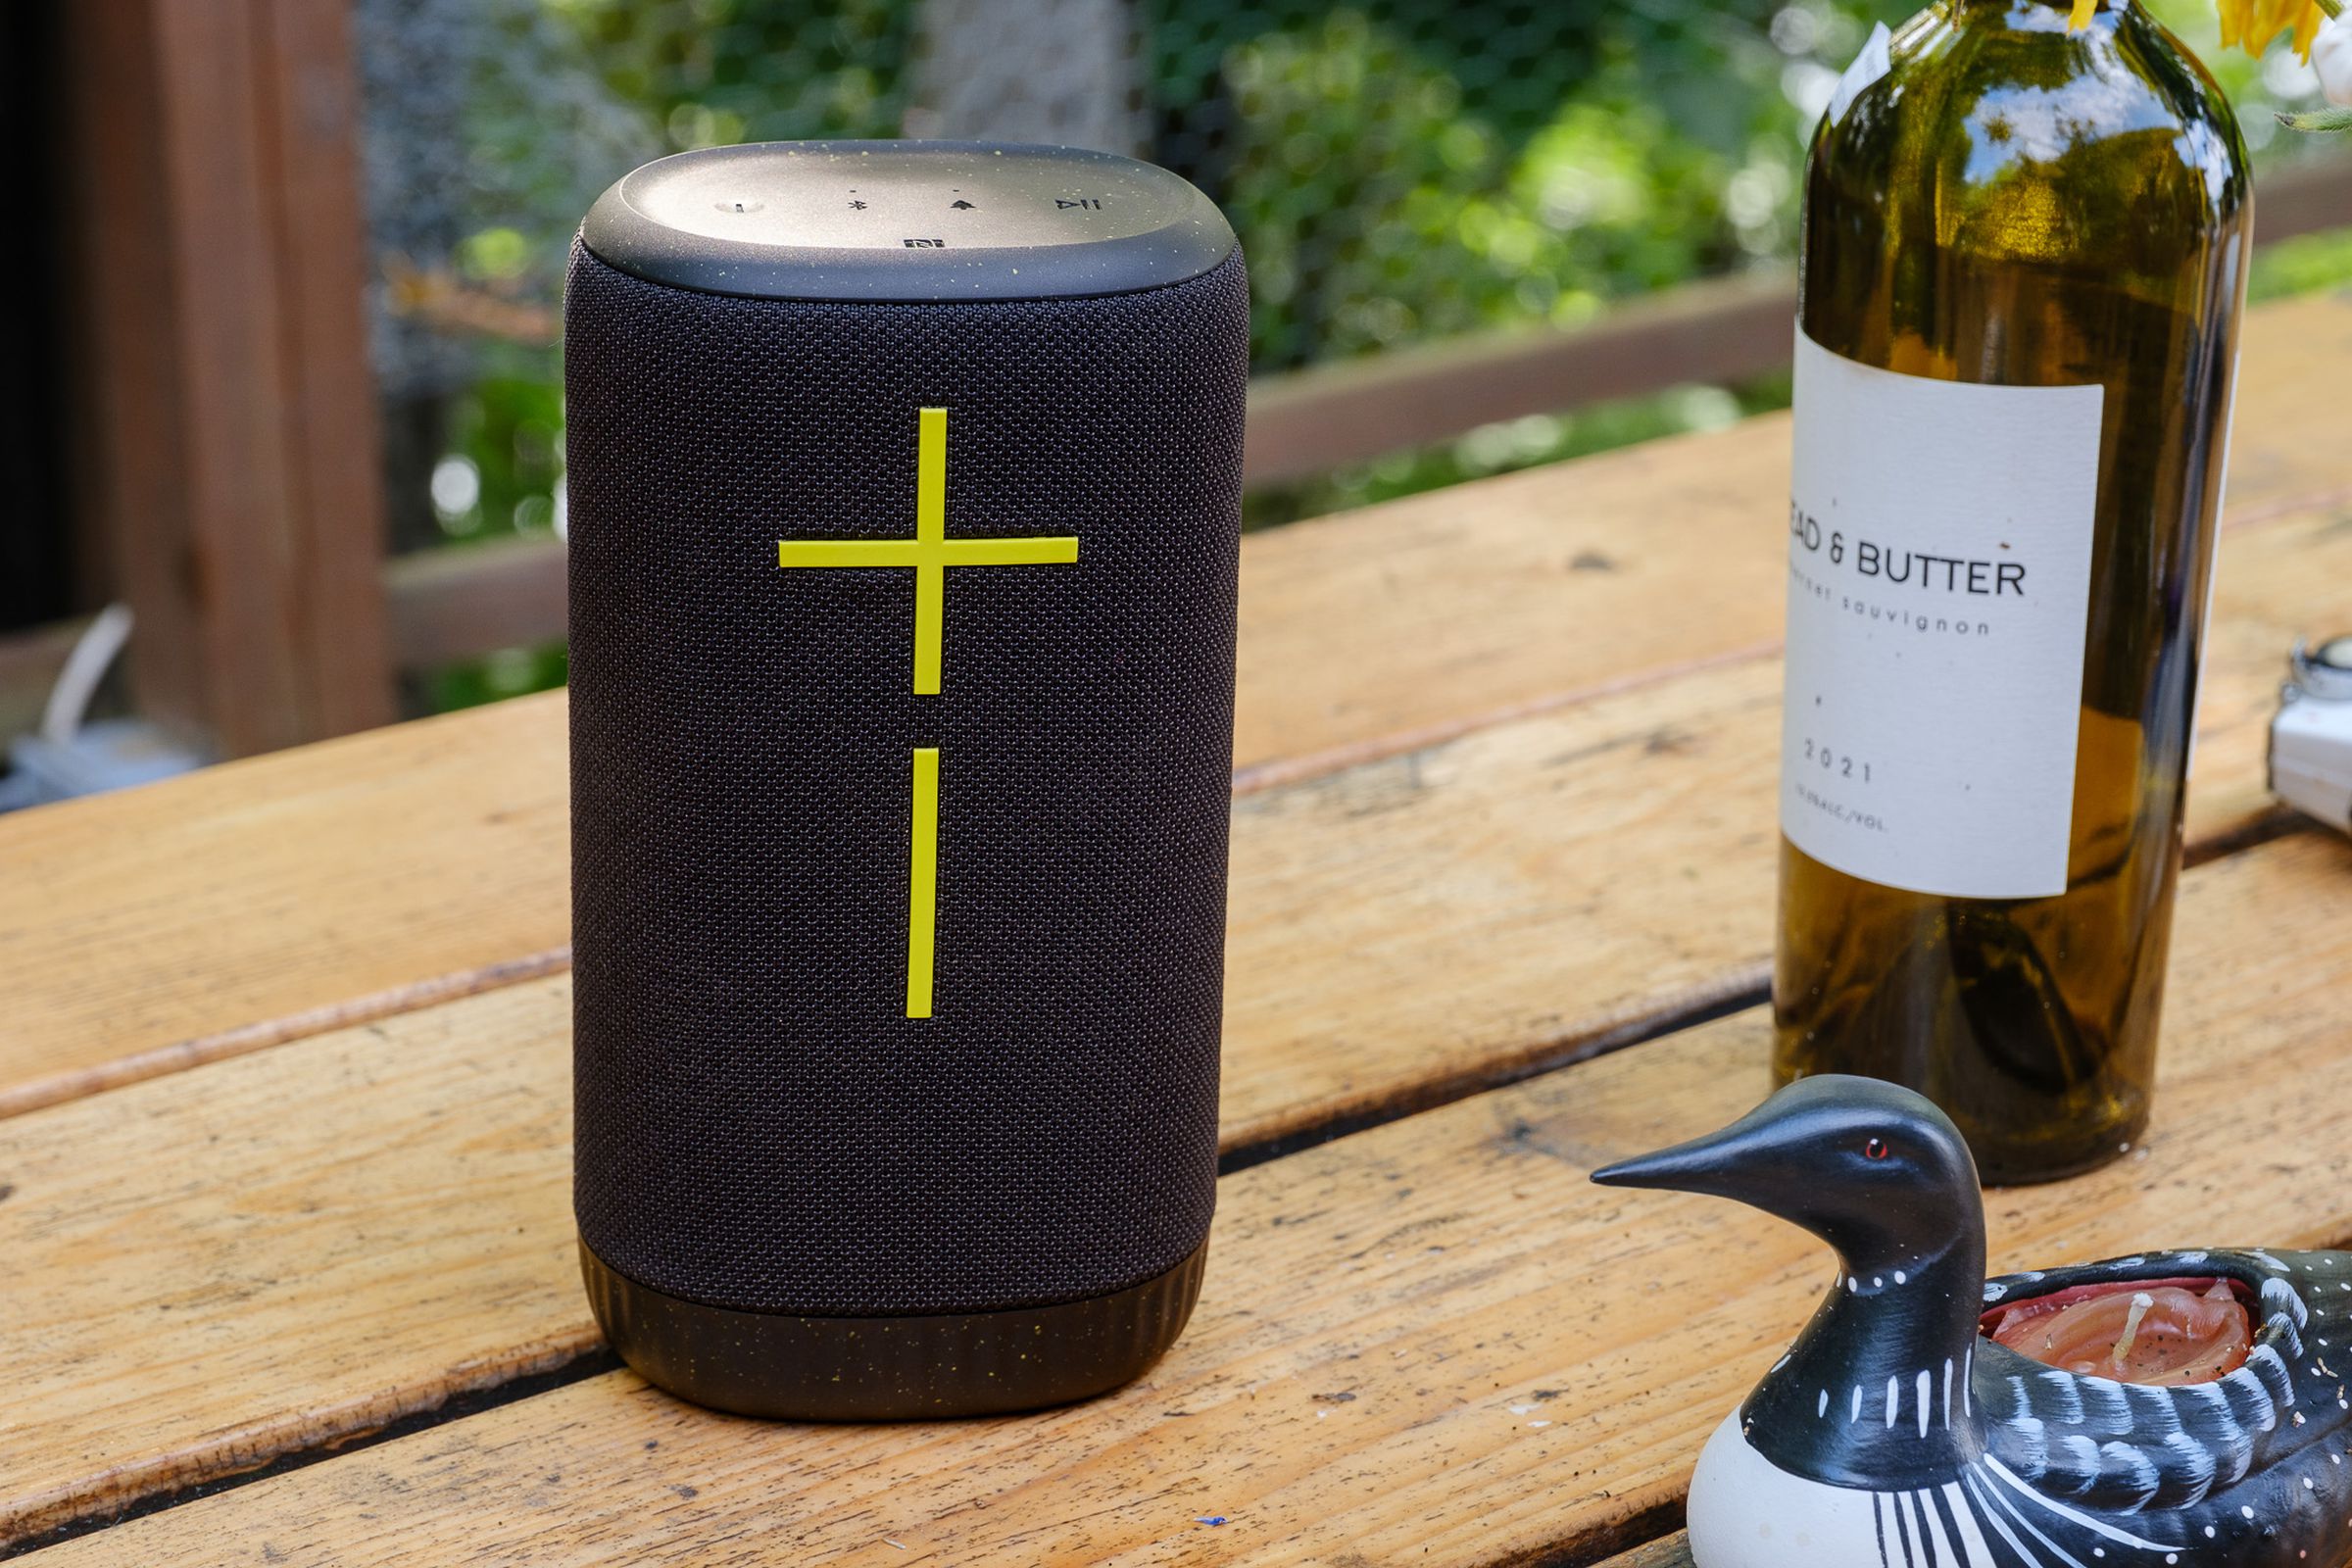 A photo of the Ultimate Ears Everboom portable Bluetooth speaker.